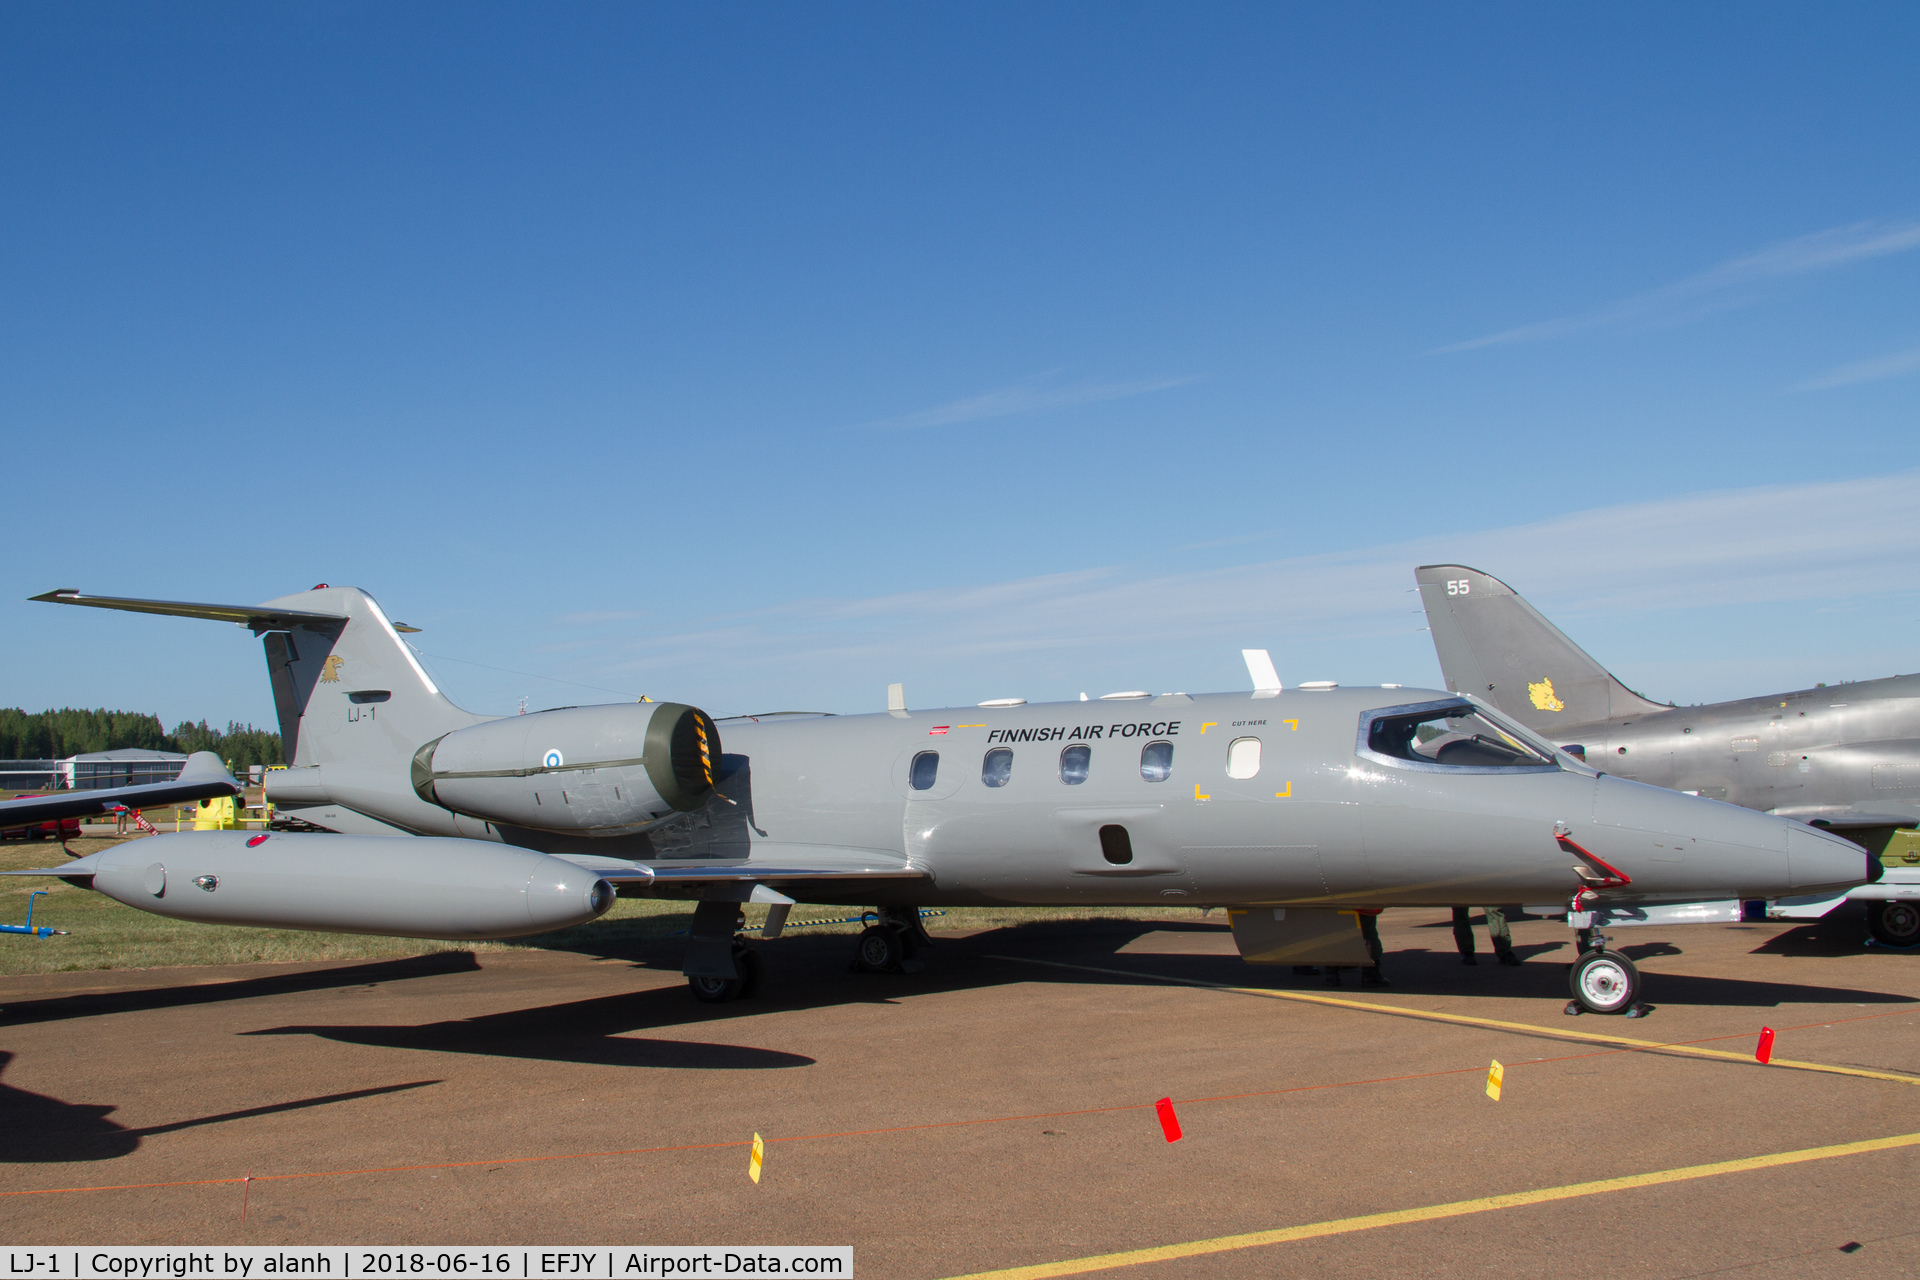 LJ-1, 1981 Gates Learjet 35A C/N 35A-430, Static display at the 100th Anniversary of the Finnish Air Force airshow